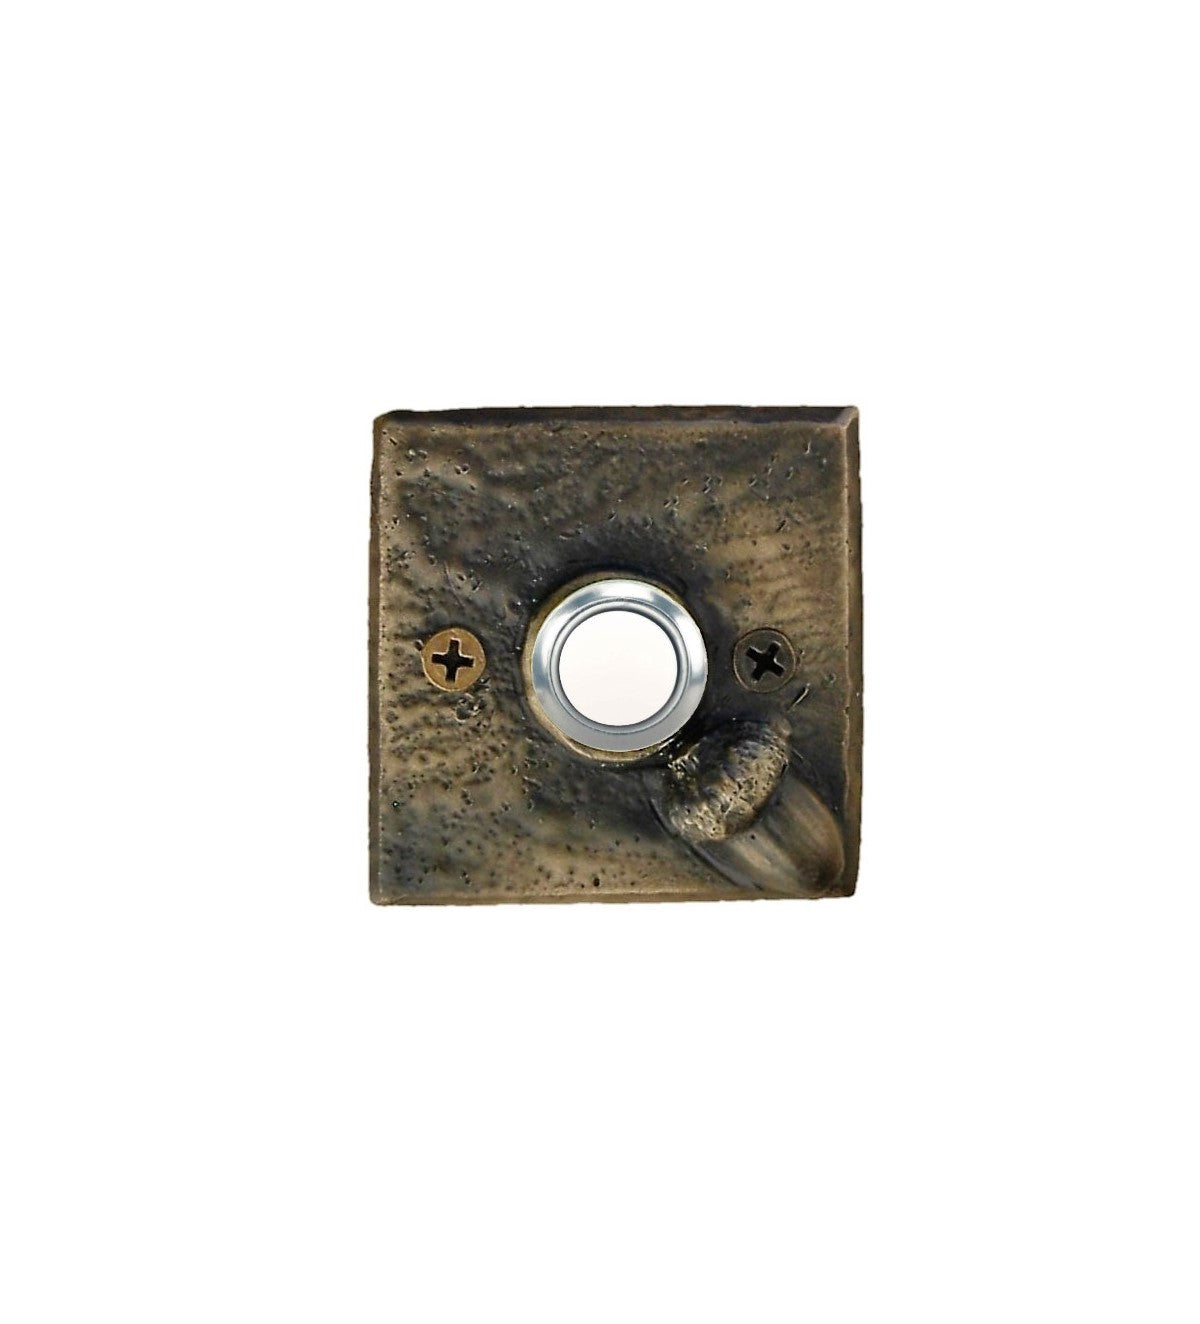 Square bronze doorbell plate with acorn in lower right corner